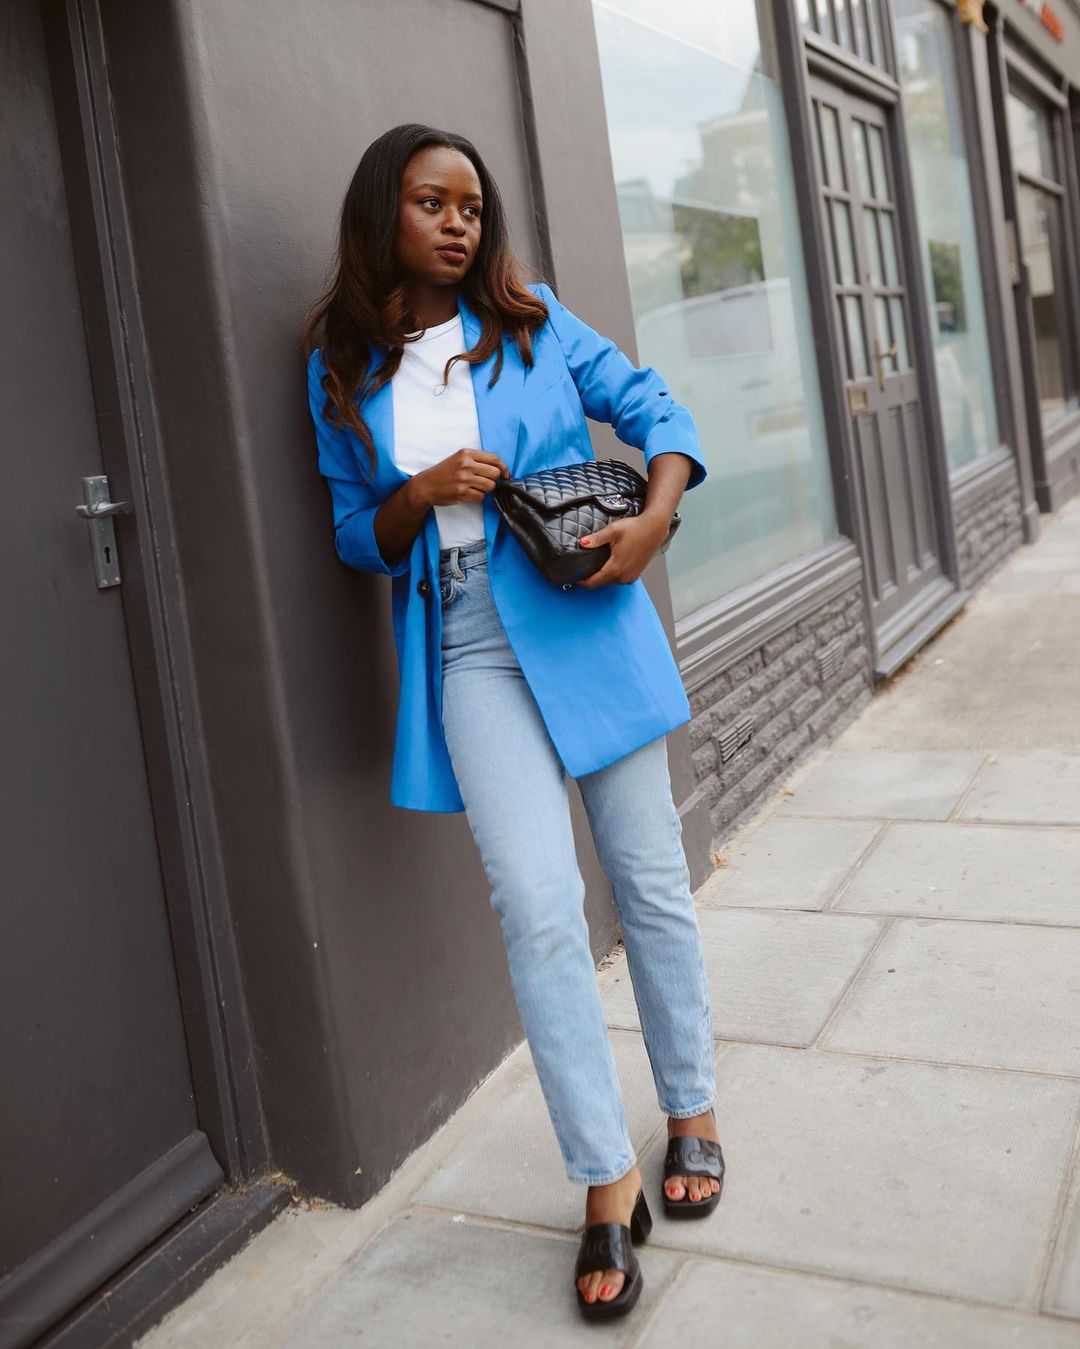 What to wear with skinny jeans: @eniswardrobe wears a blue blazer with skinny jeans and mules